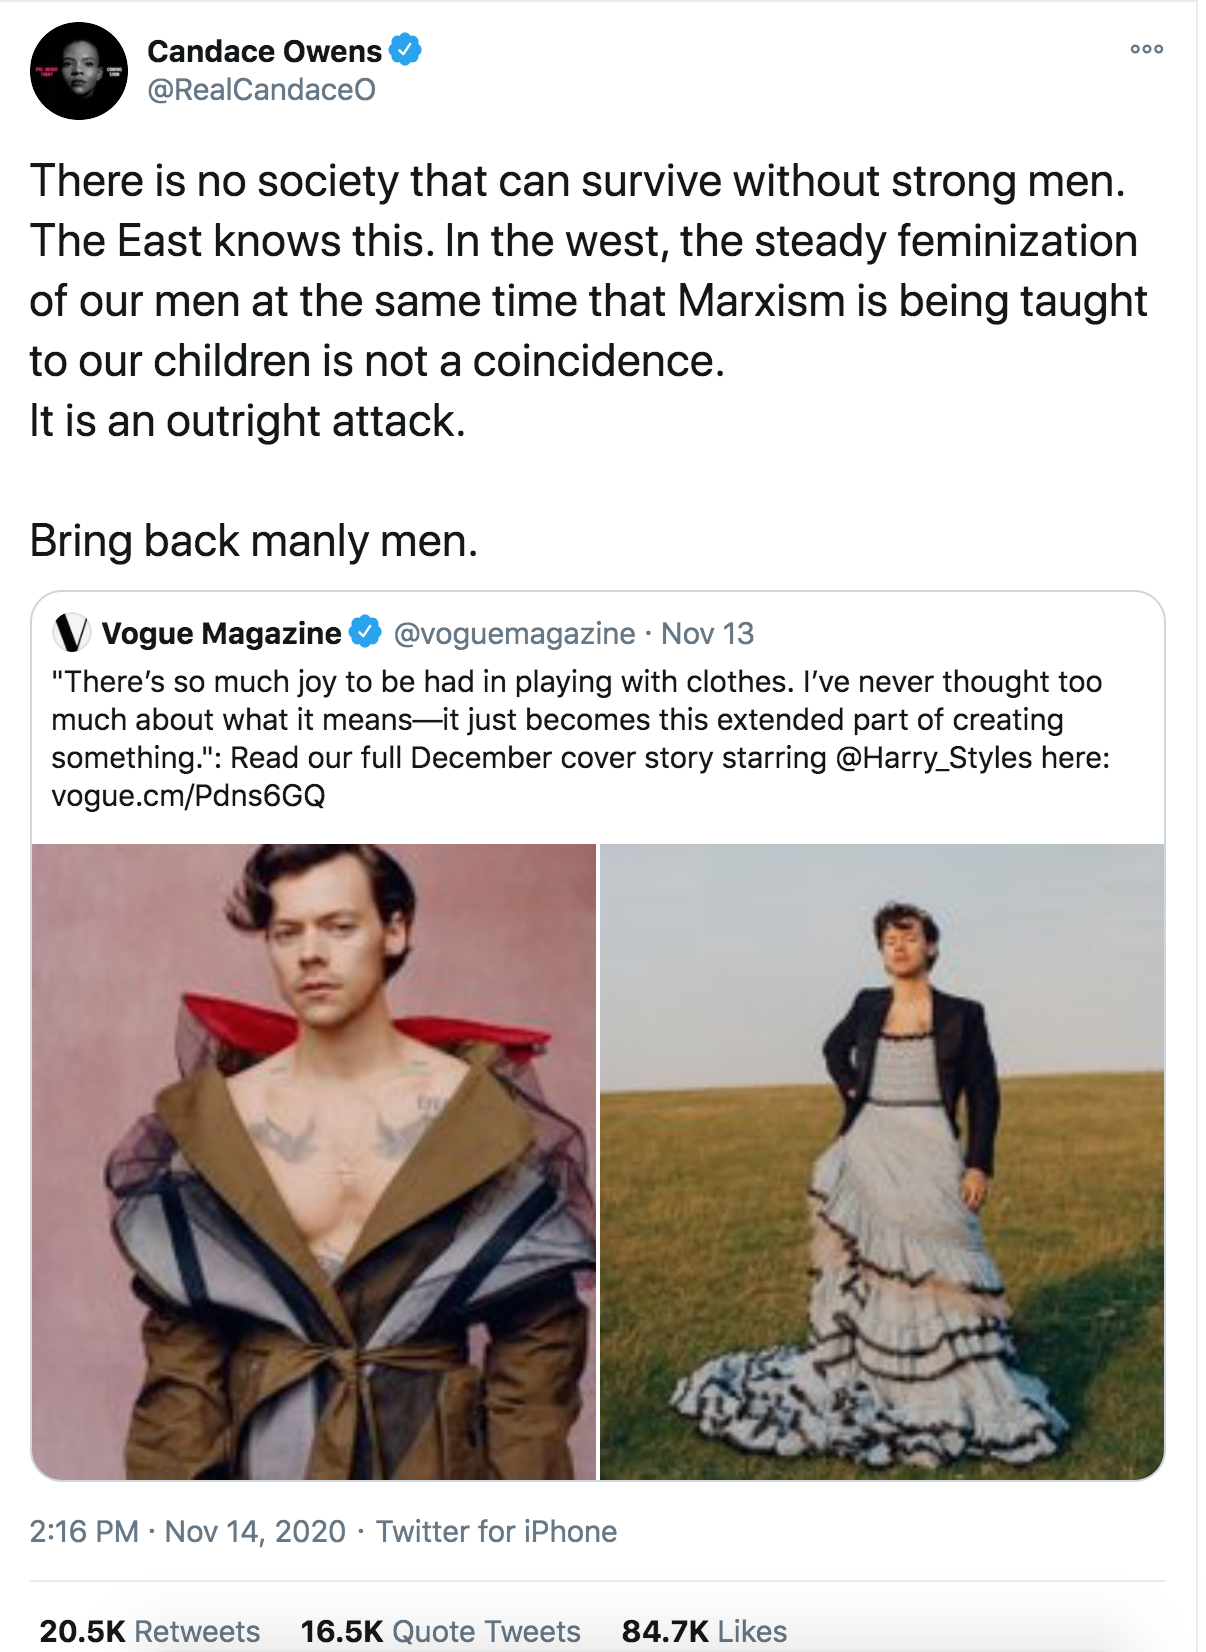 media - E Candace Owens There is no society that can survive without strong men. The East knows this. In the west, the steady feminization of our men at the same time that Marxism is being taught to our children is not a coincidence. It is an outright att